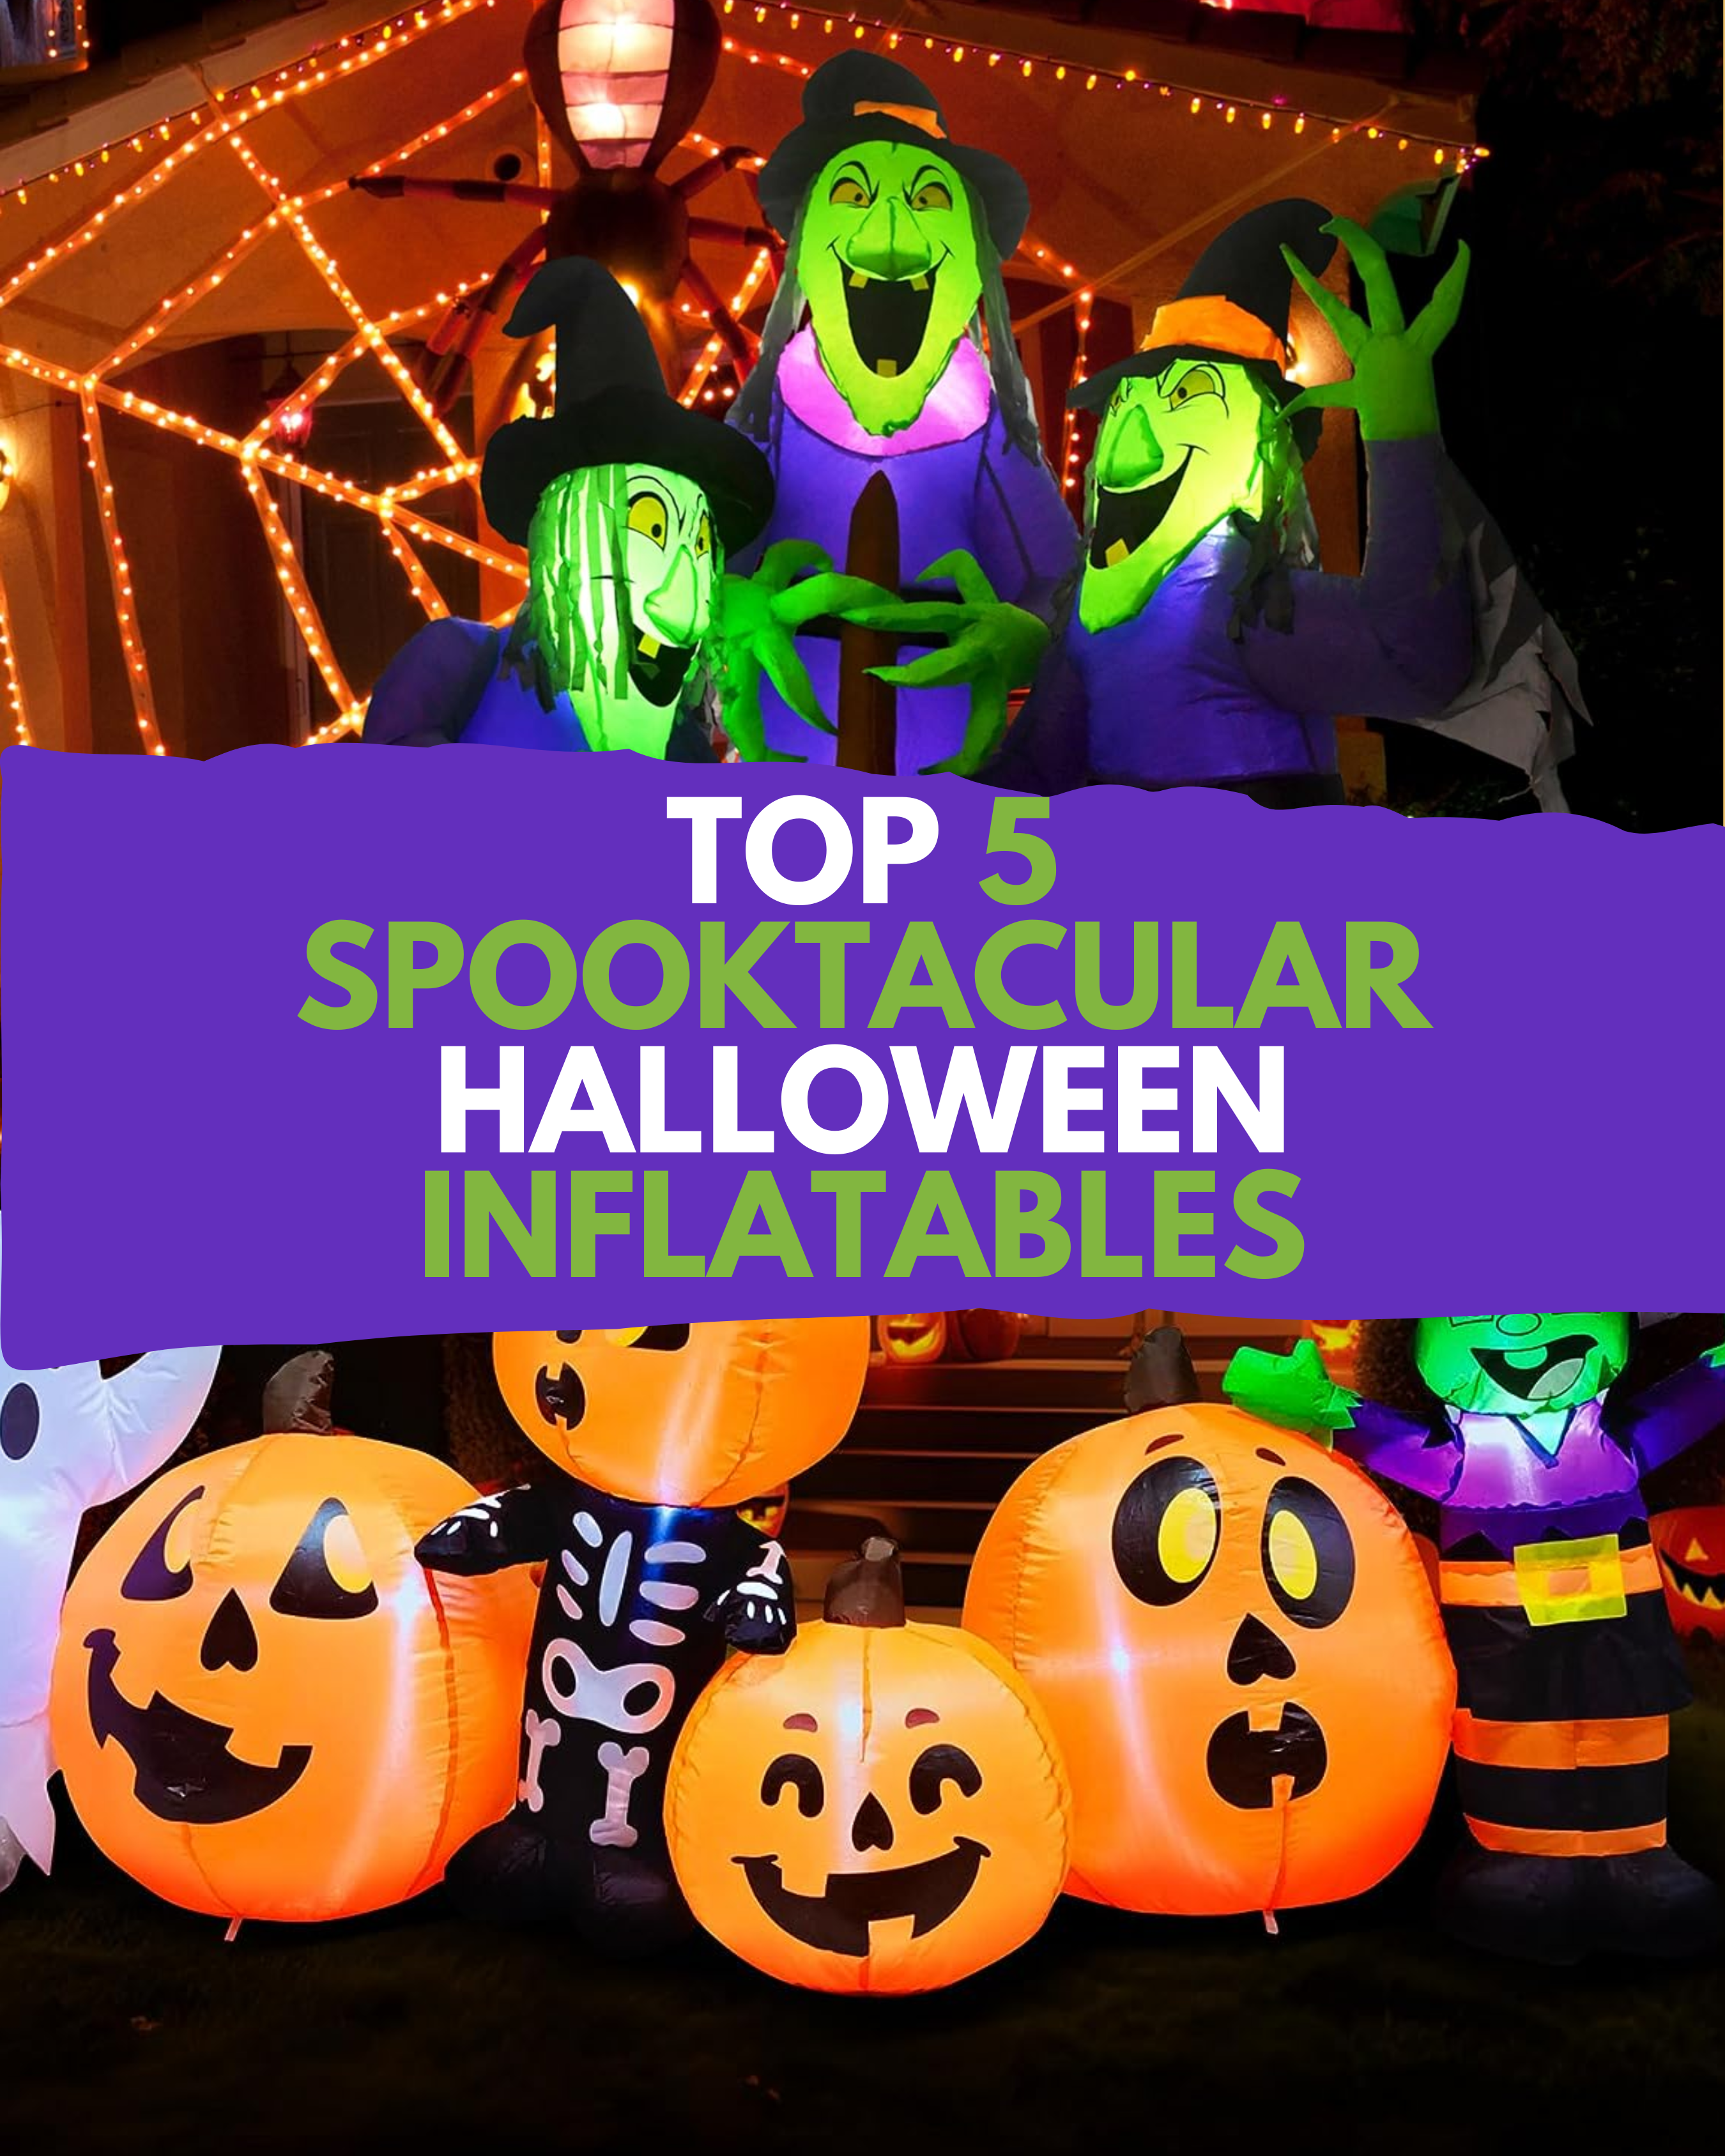 Top 5 Spooktacular Halloween Inflatables from Amazon